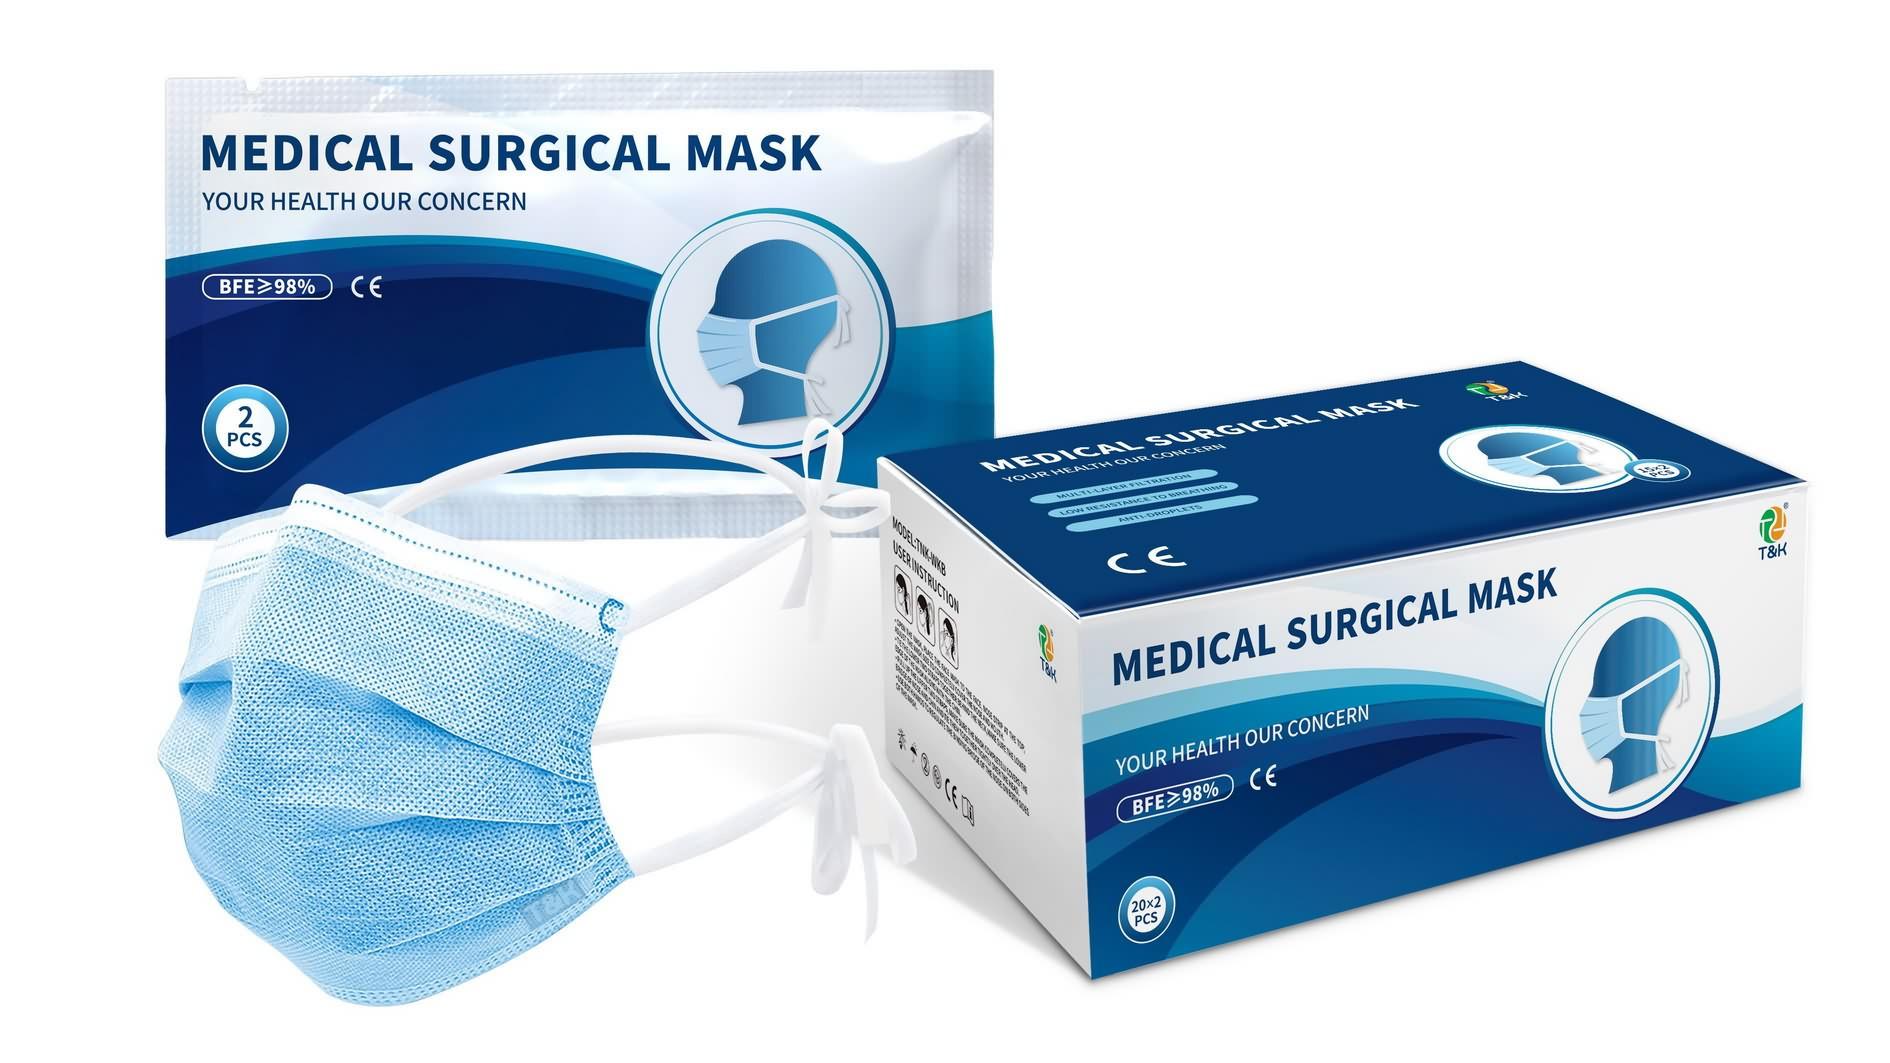 How long is the shelf life of masks and who can't wear masks - famous type IIR mask factory outlet